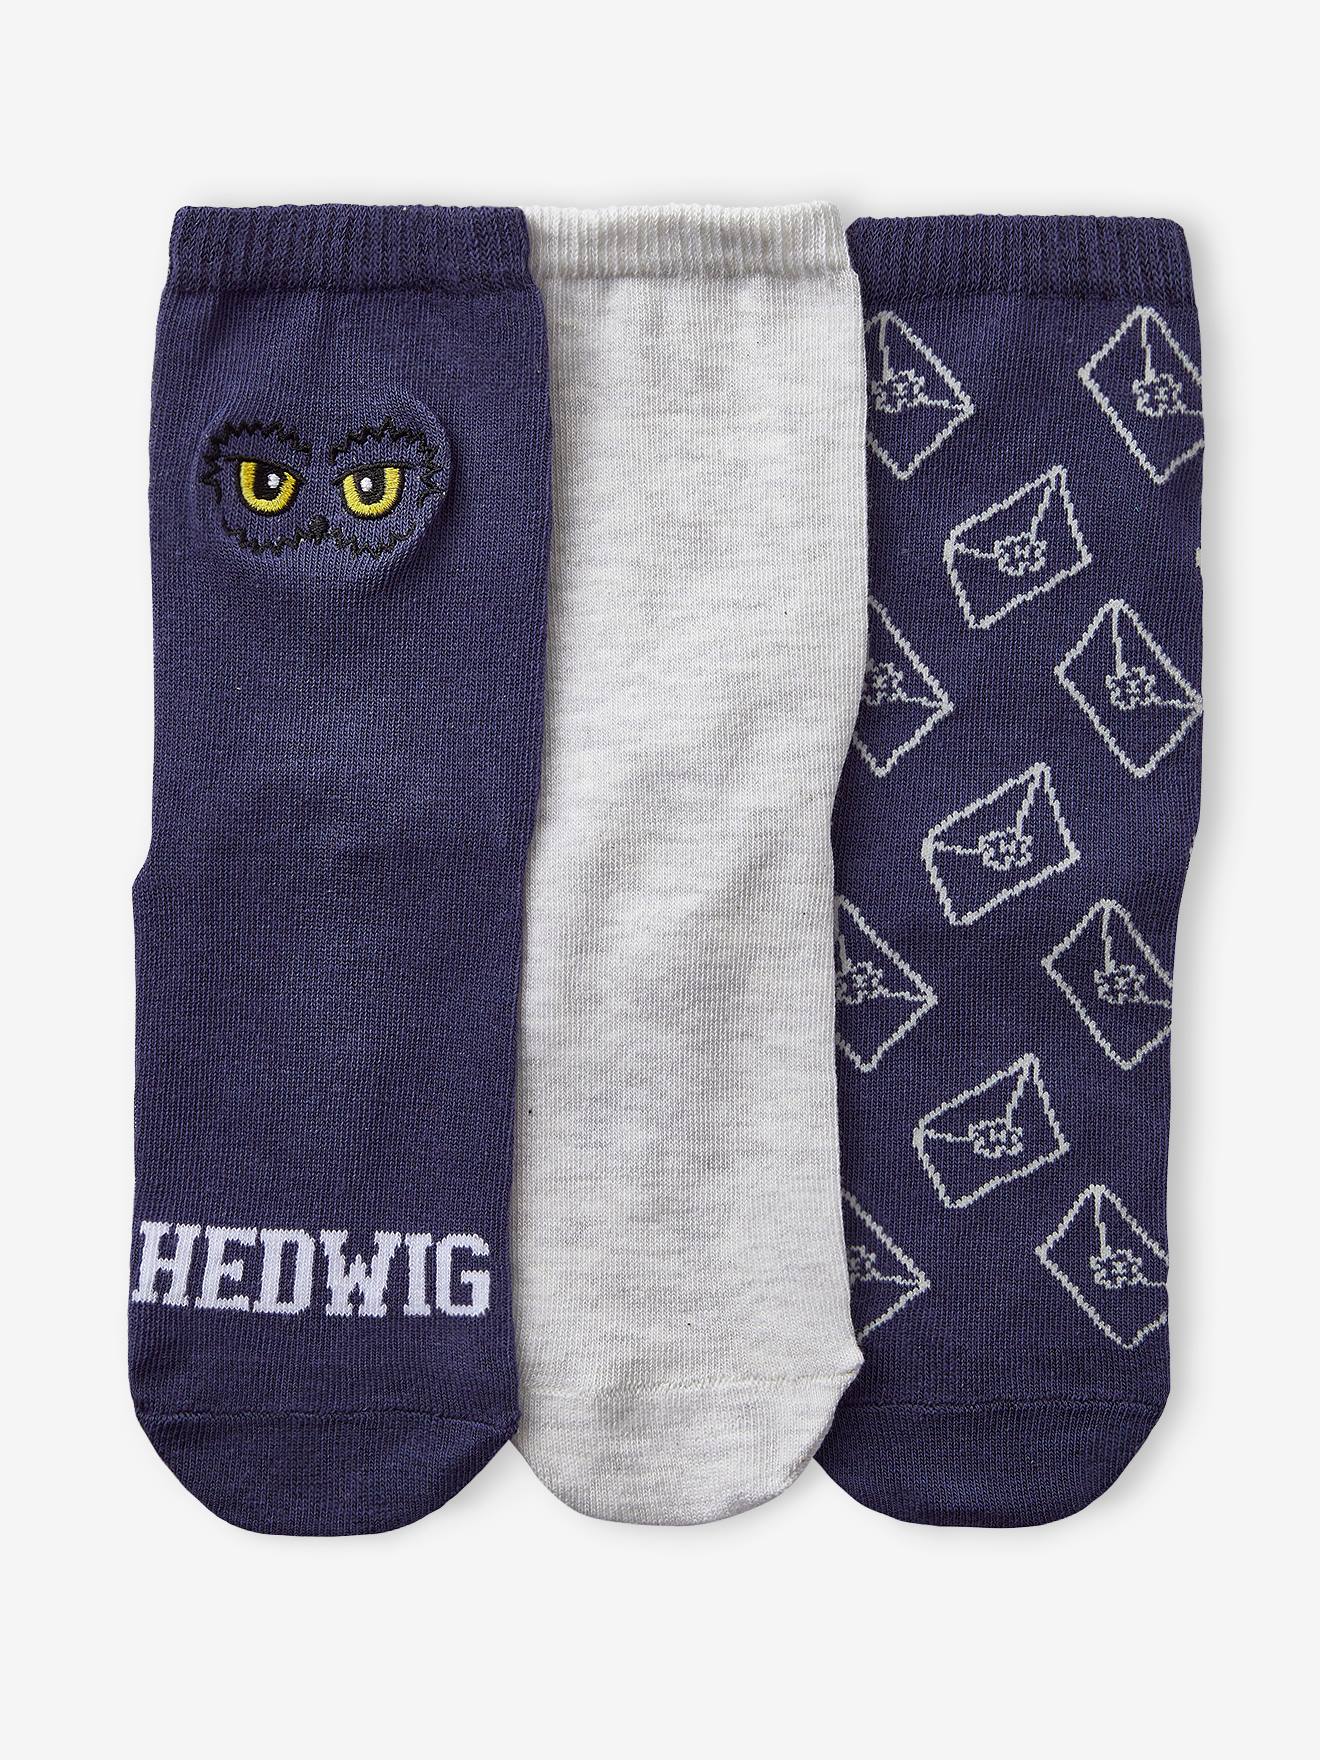 Pack of 3 Pairs of Harry Potter(r) Socks blue light all over printed